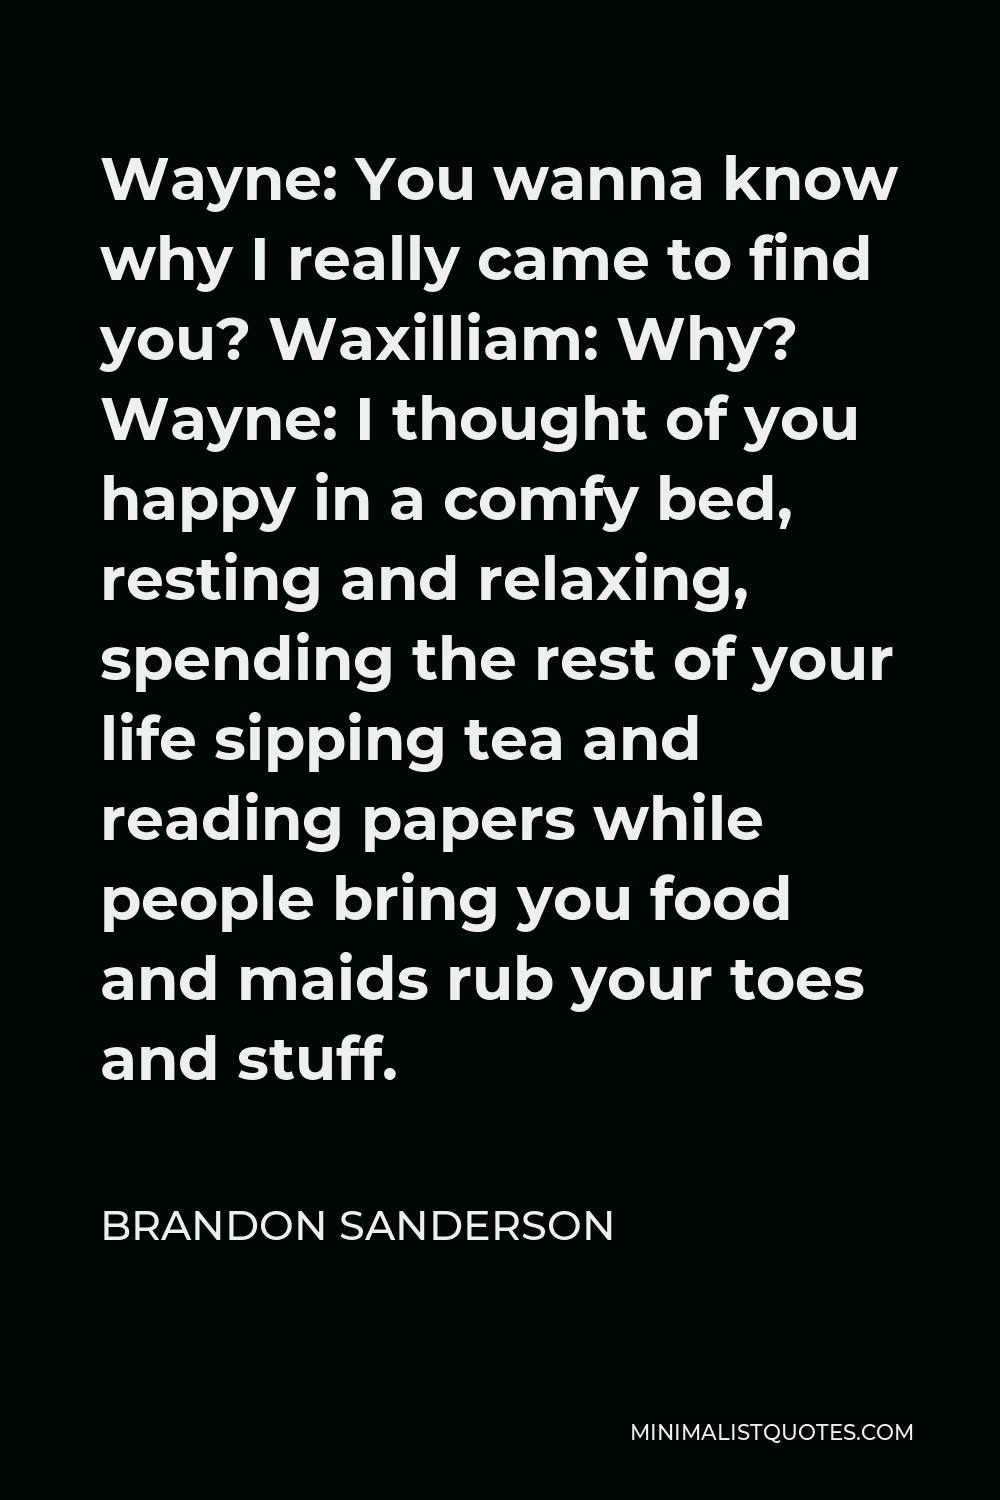 Brandon Sanderson Quote - Wayne: You wanna know why I really came to find you? Waxilliam: Why? Wayne: I thought of you happy in a comfy bed, resting and relaxing, spending the rest of your life sipping tea and reading papers while people bring you food and maids rub your toes and stuff.